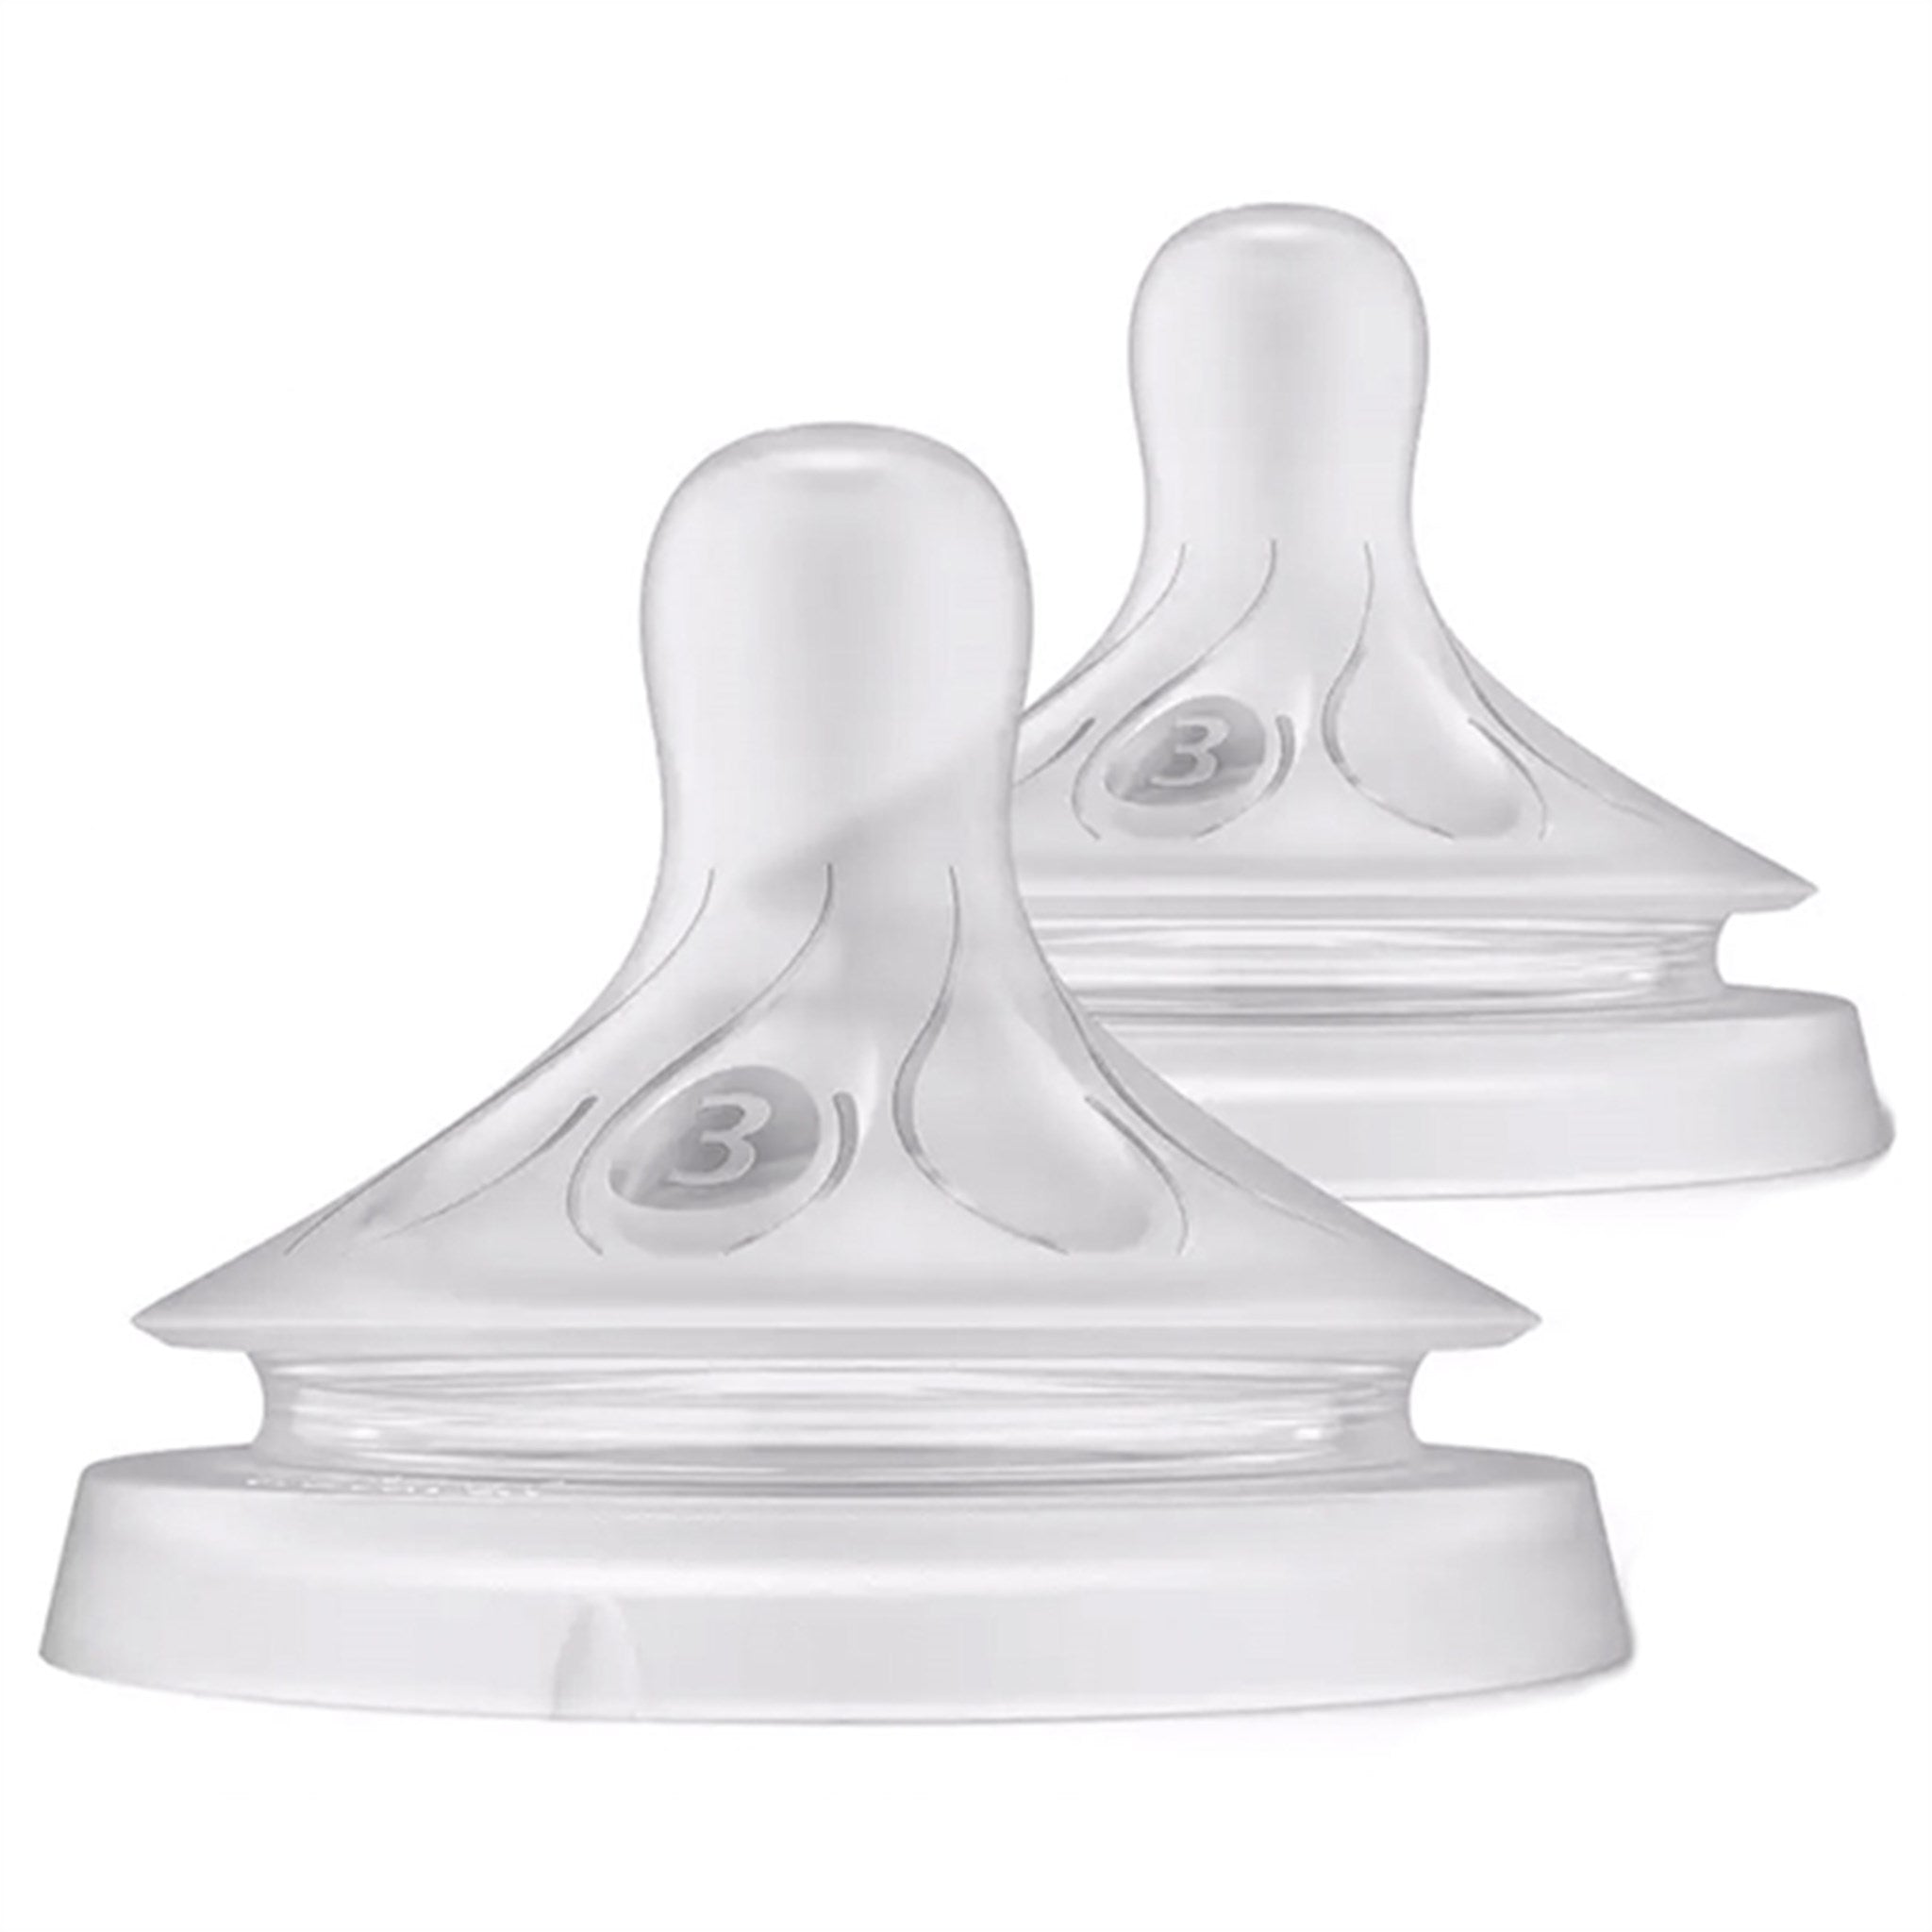 Philips Avent Natural Feeding Bottle Heads Response 1 months 2-pack